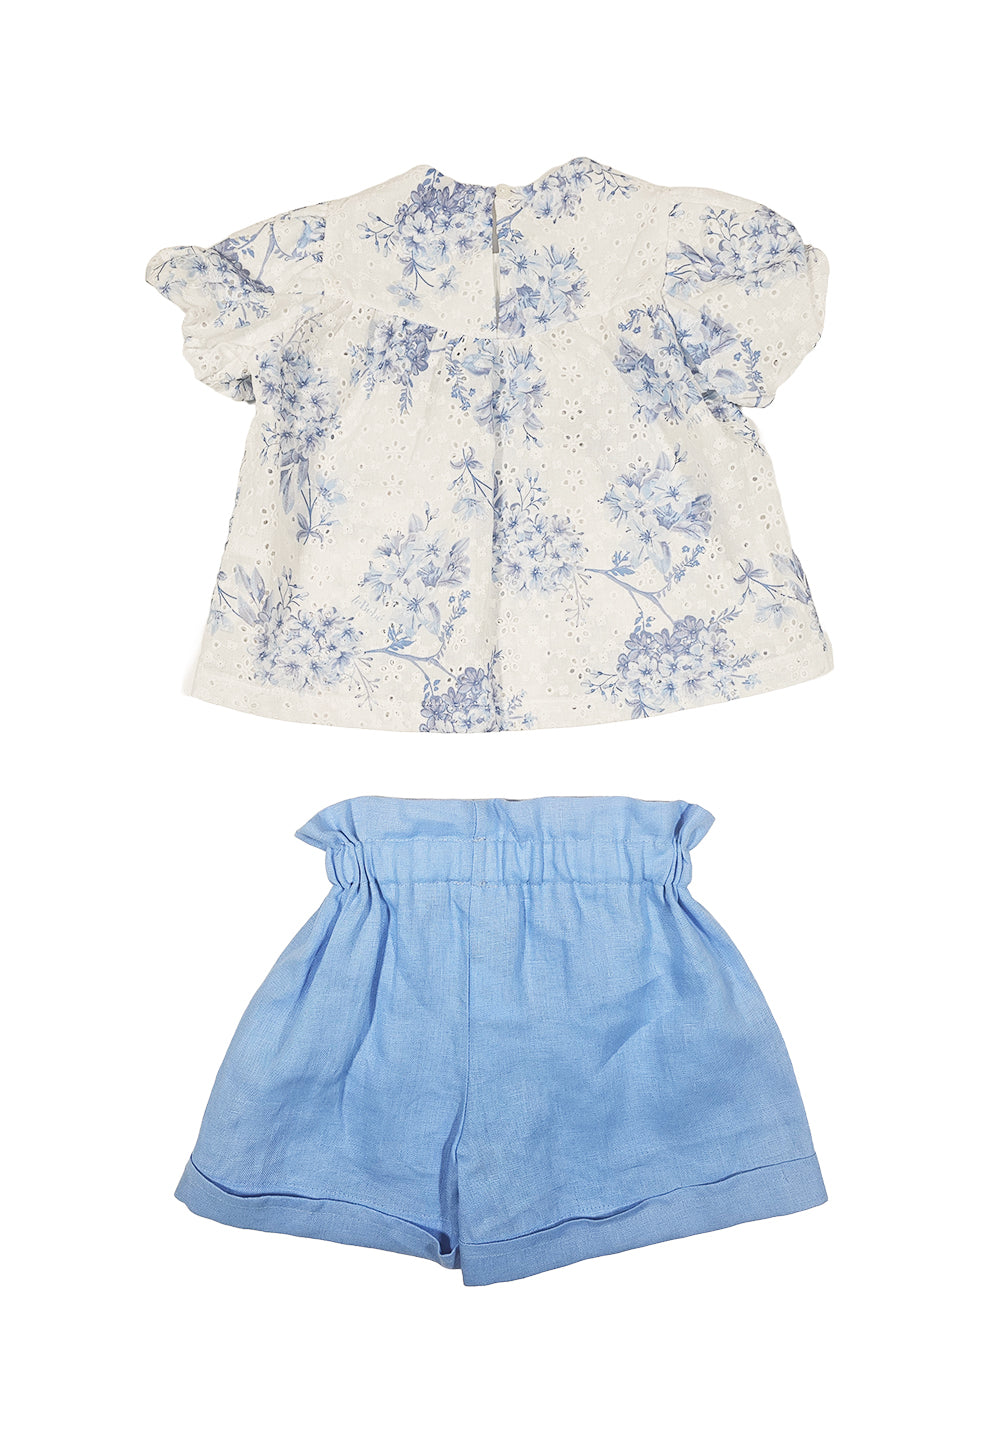 White-light blue outfit for girls